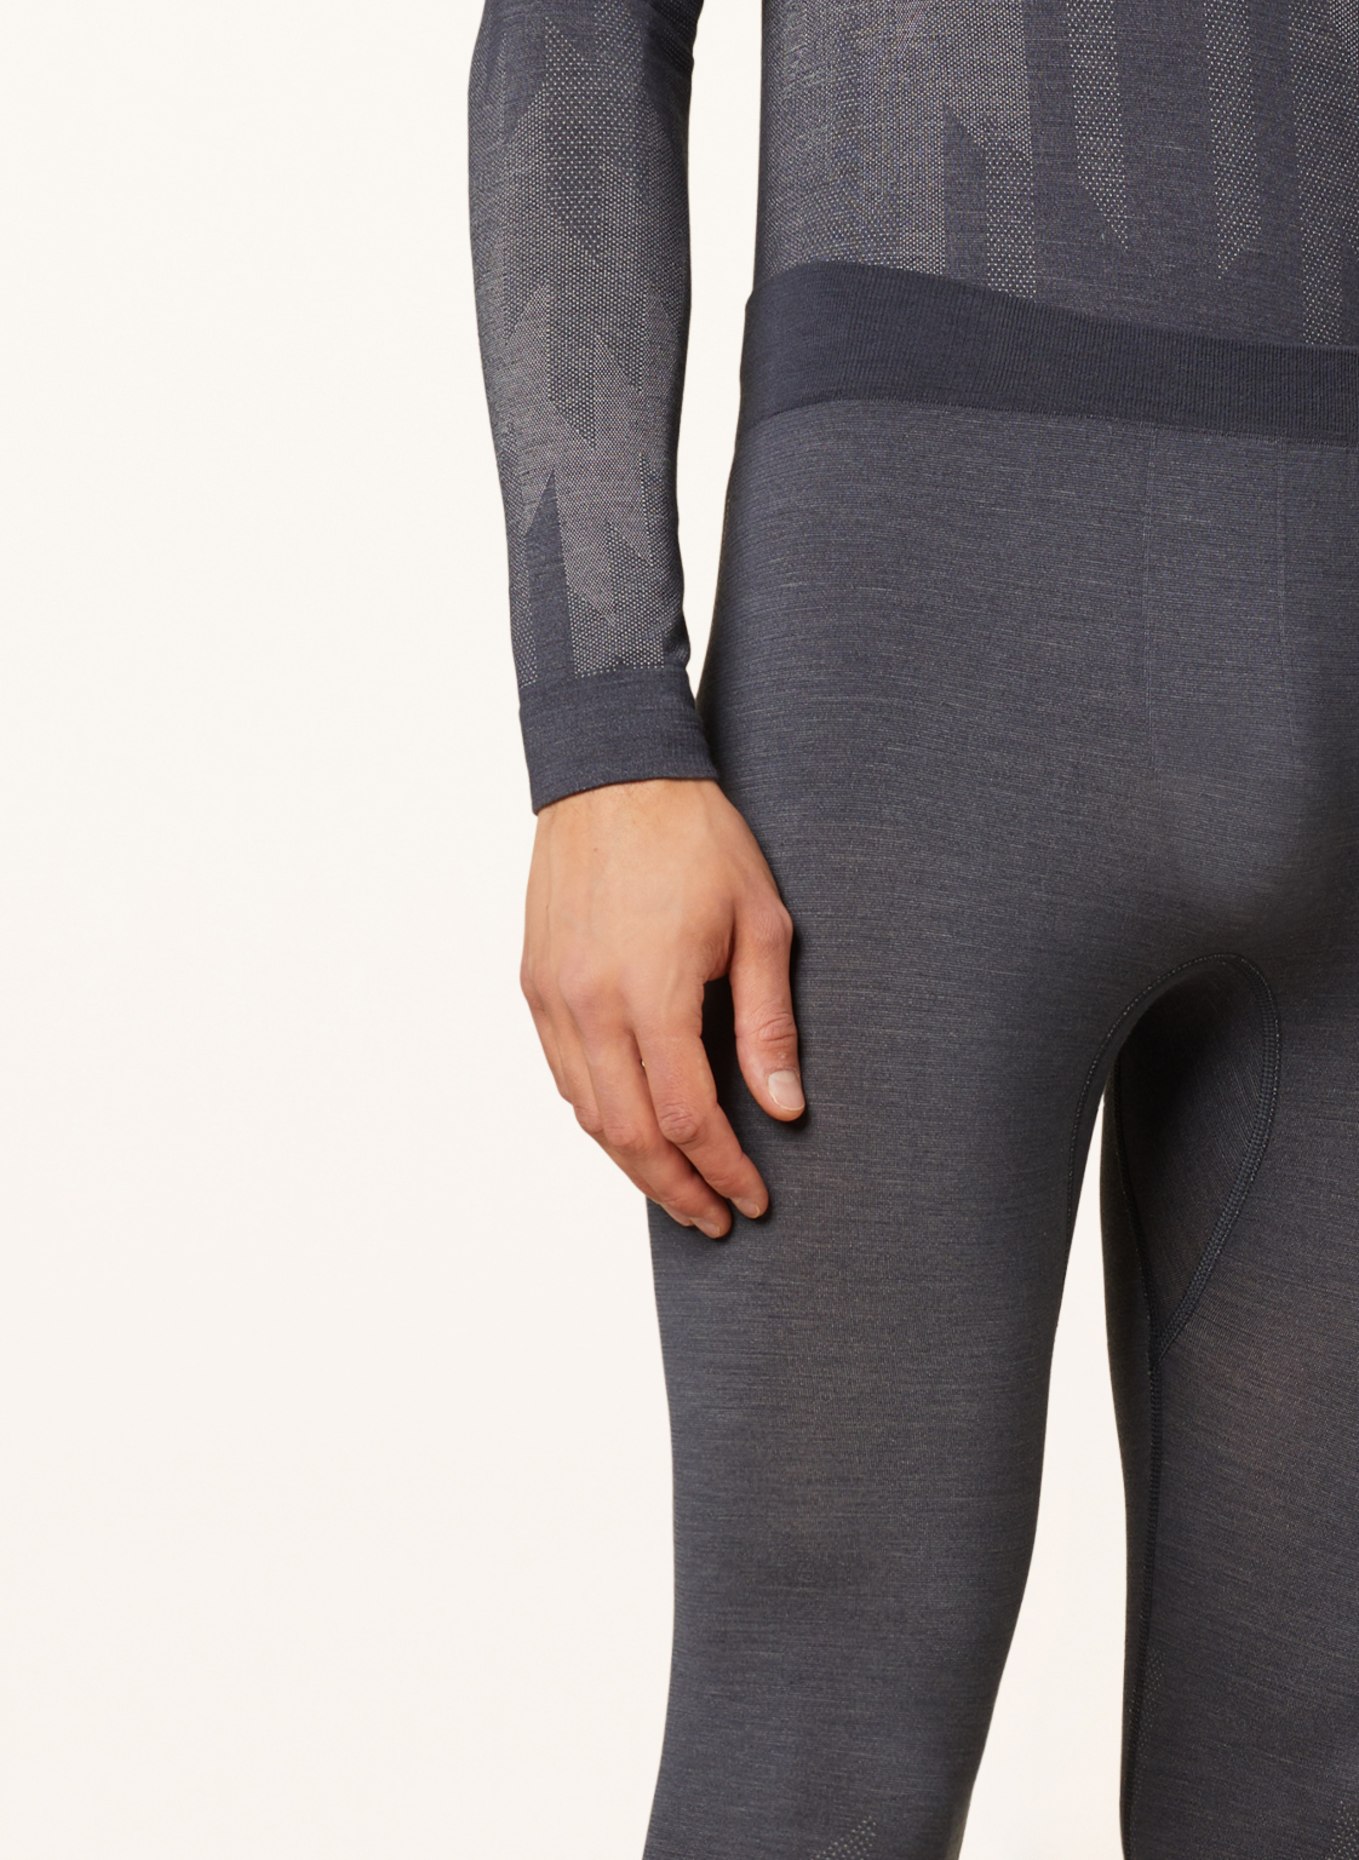 odlo Functional underwear trousers KINSHIP PERFORMANCE 200 with merino wool, Color: BLUE GRAY (Image 5)